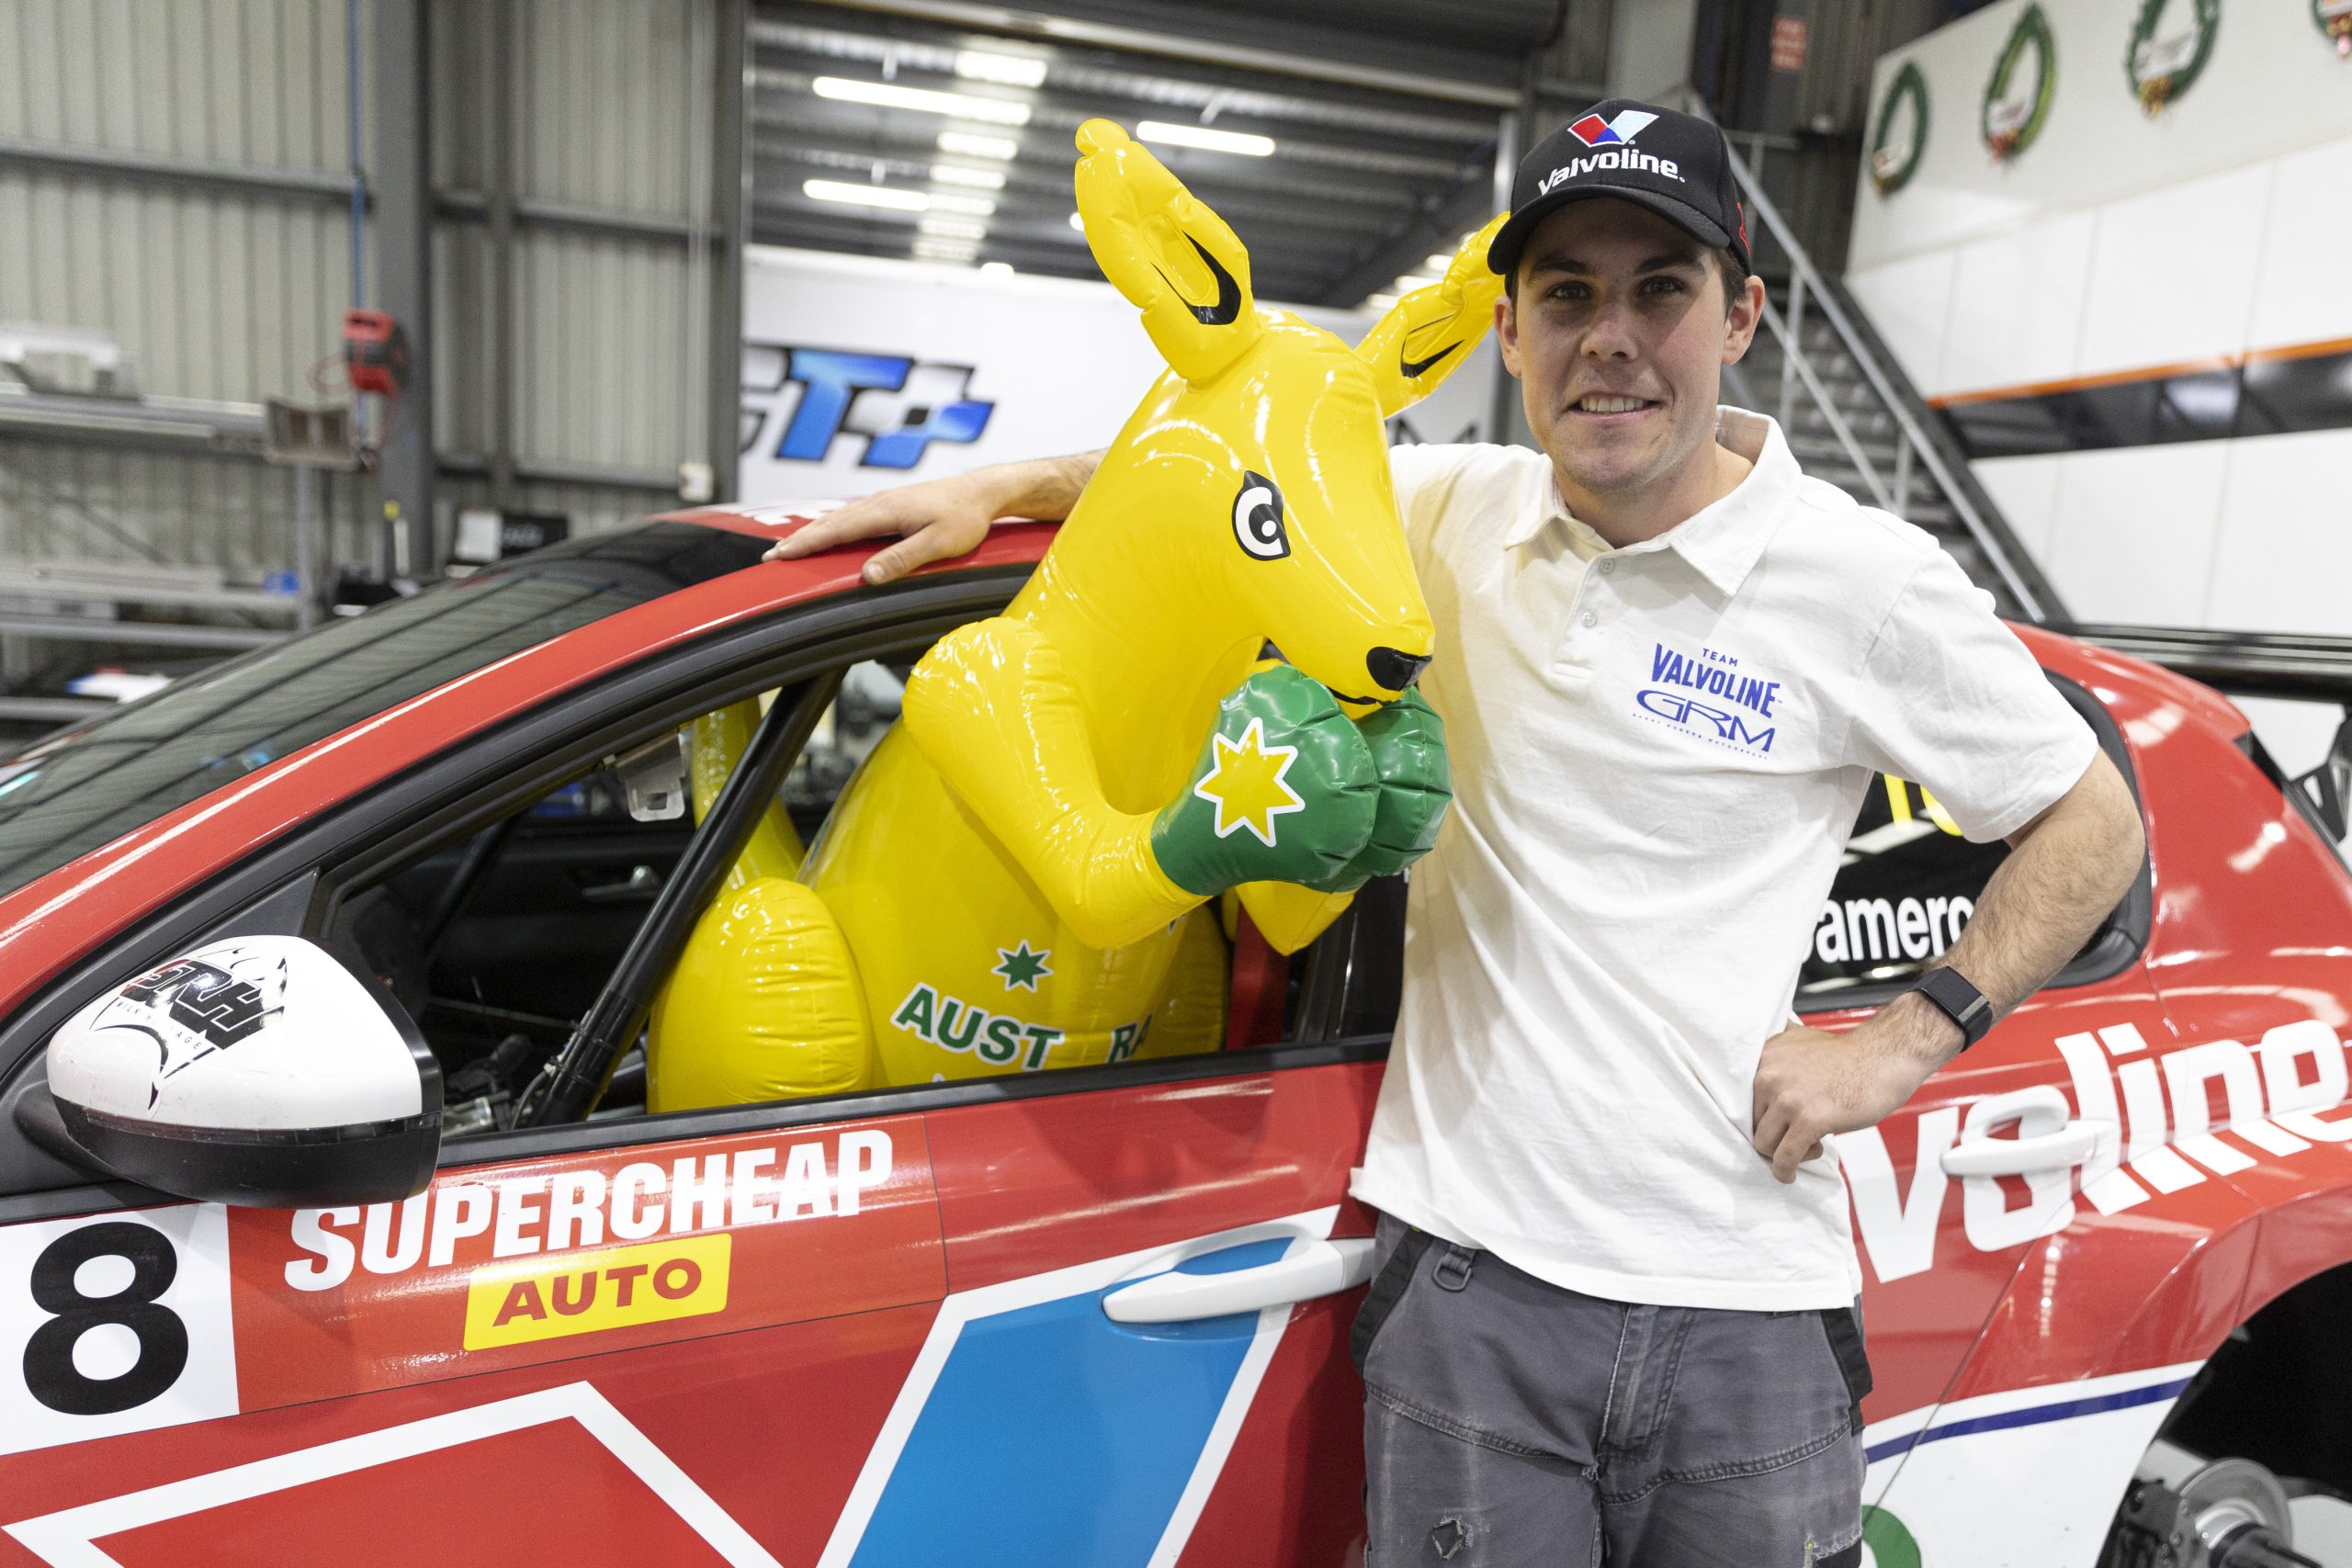 Cameron to Compete in France at FIA Motorsport Games for Australia